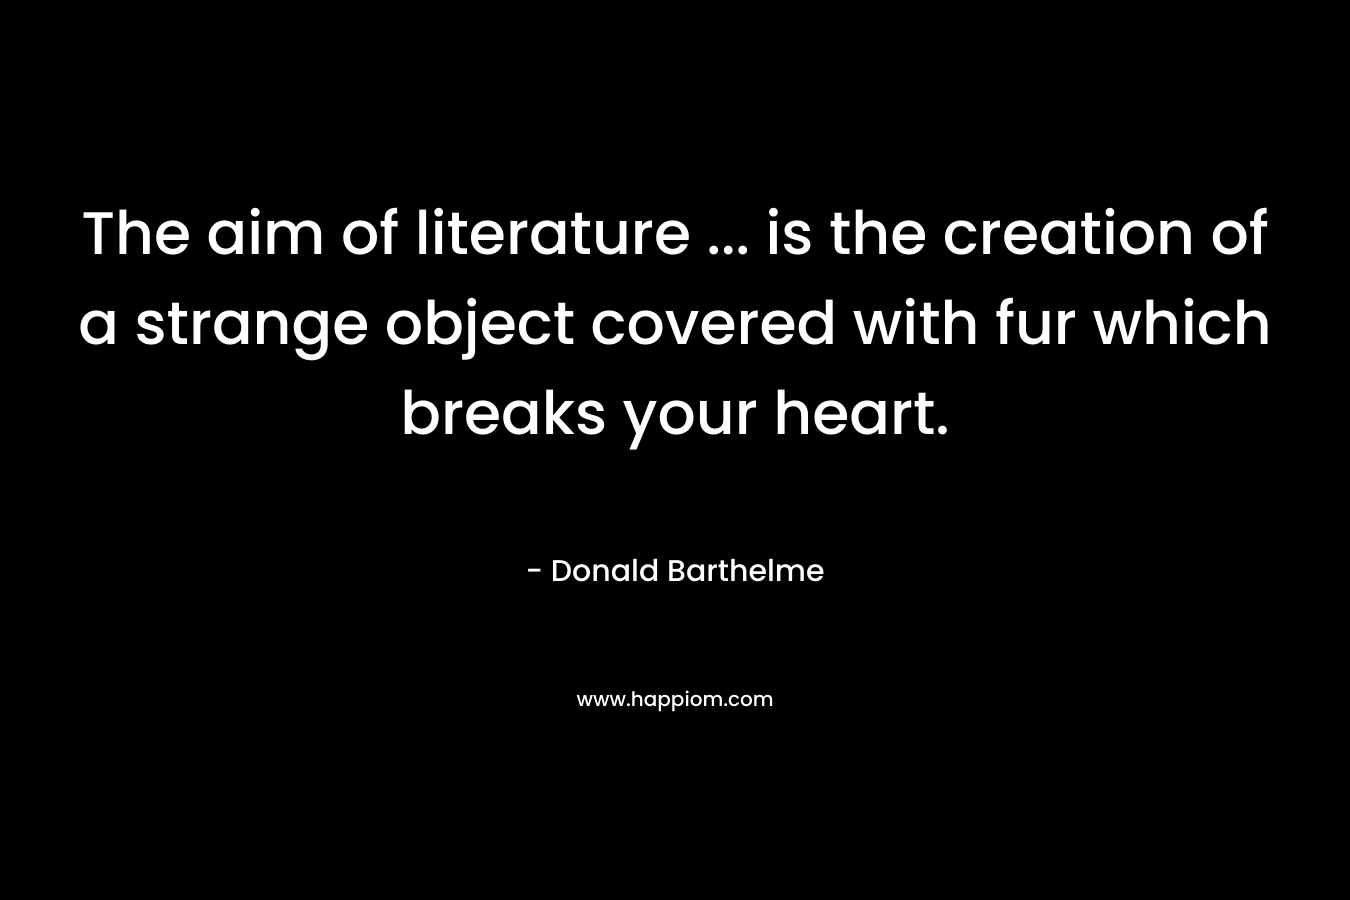 The aim of literature ... is the creation of a strange object covered with fur which breaks your heart.